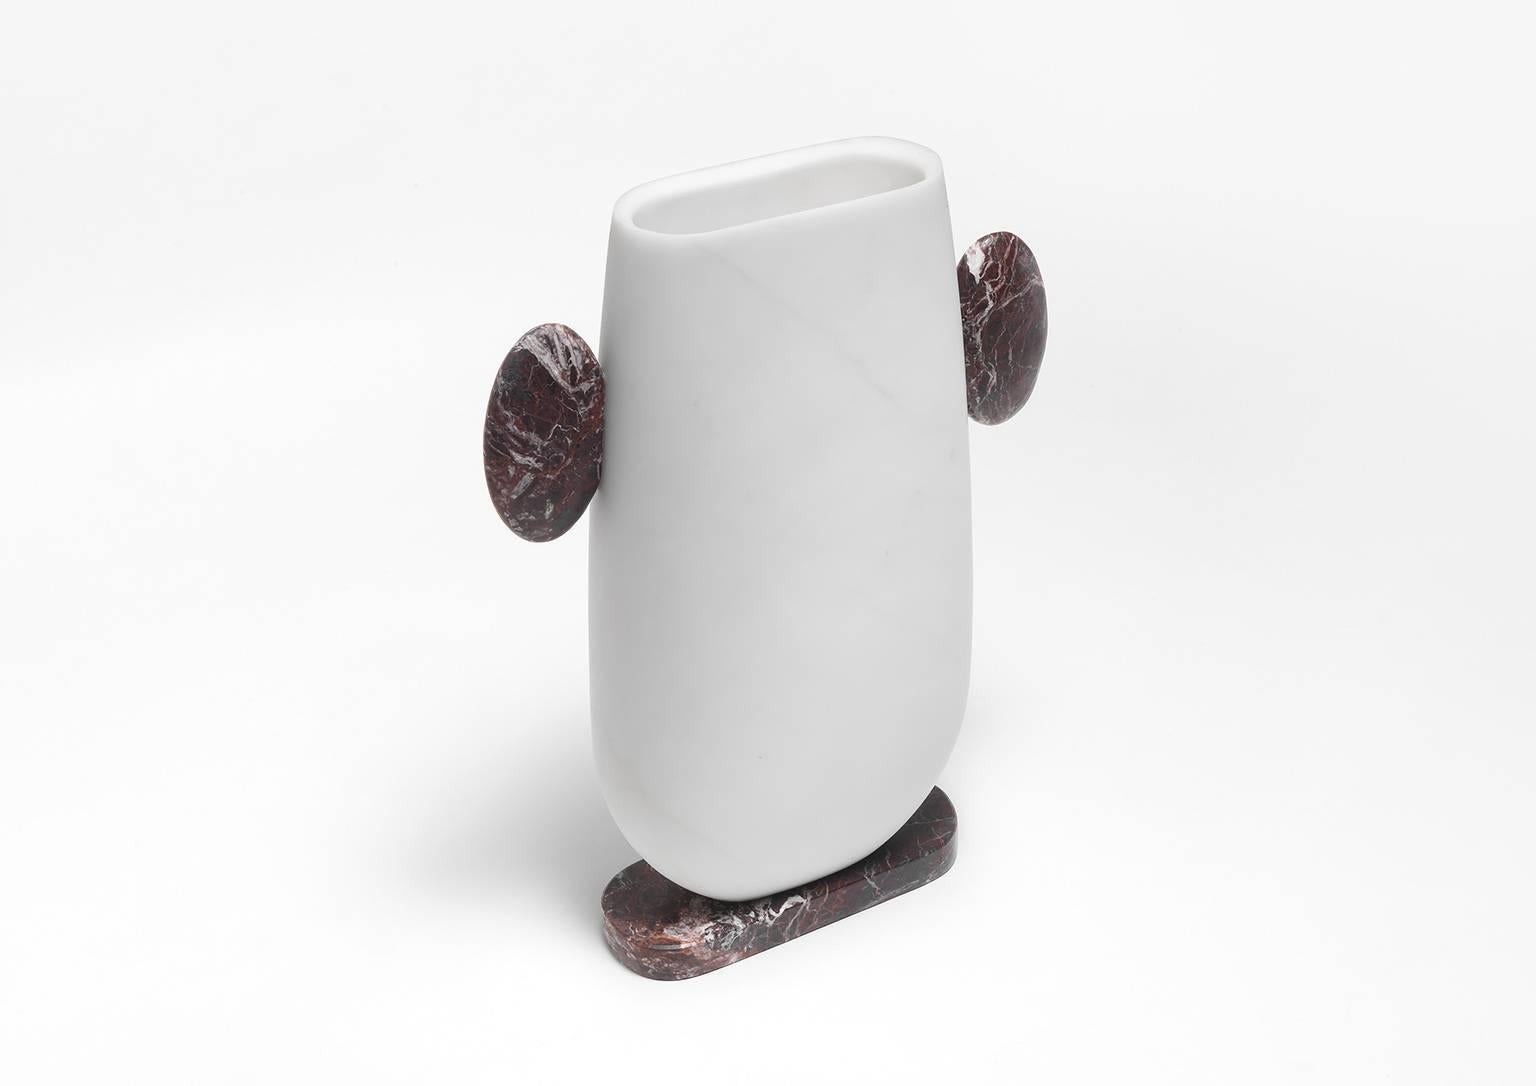 
Vase white Michelangelo and red Levanto marble.
Size: 27.3 x 38.4 x 7.3 cm, smooth finishing. Commercial name: Pietro, Homage Collection by the Italian designer Matteo Cibic. Made in Italy, hand finished.
“A painter’s drawings are like the personal